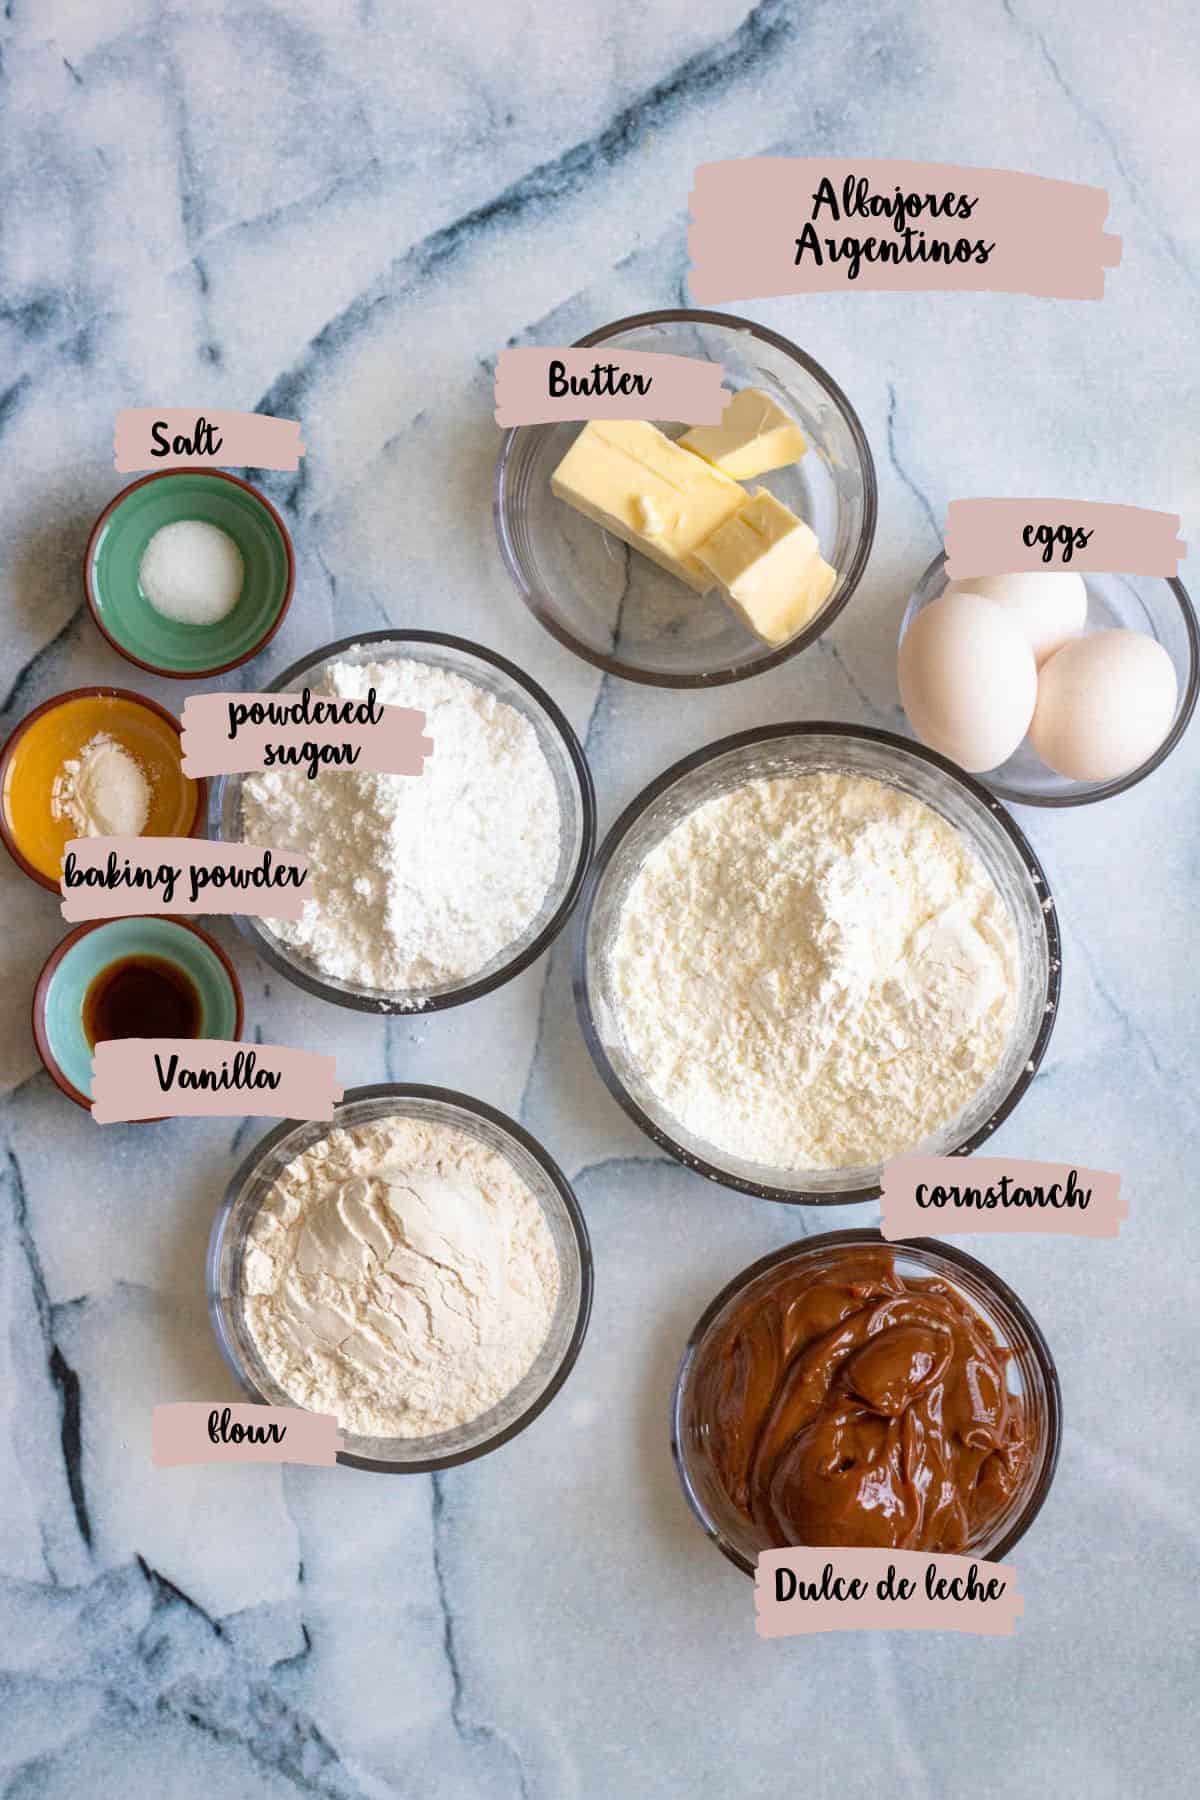 Ingredients shown are used to prepare Argentinos Alfajores. 